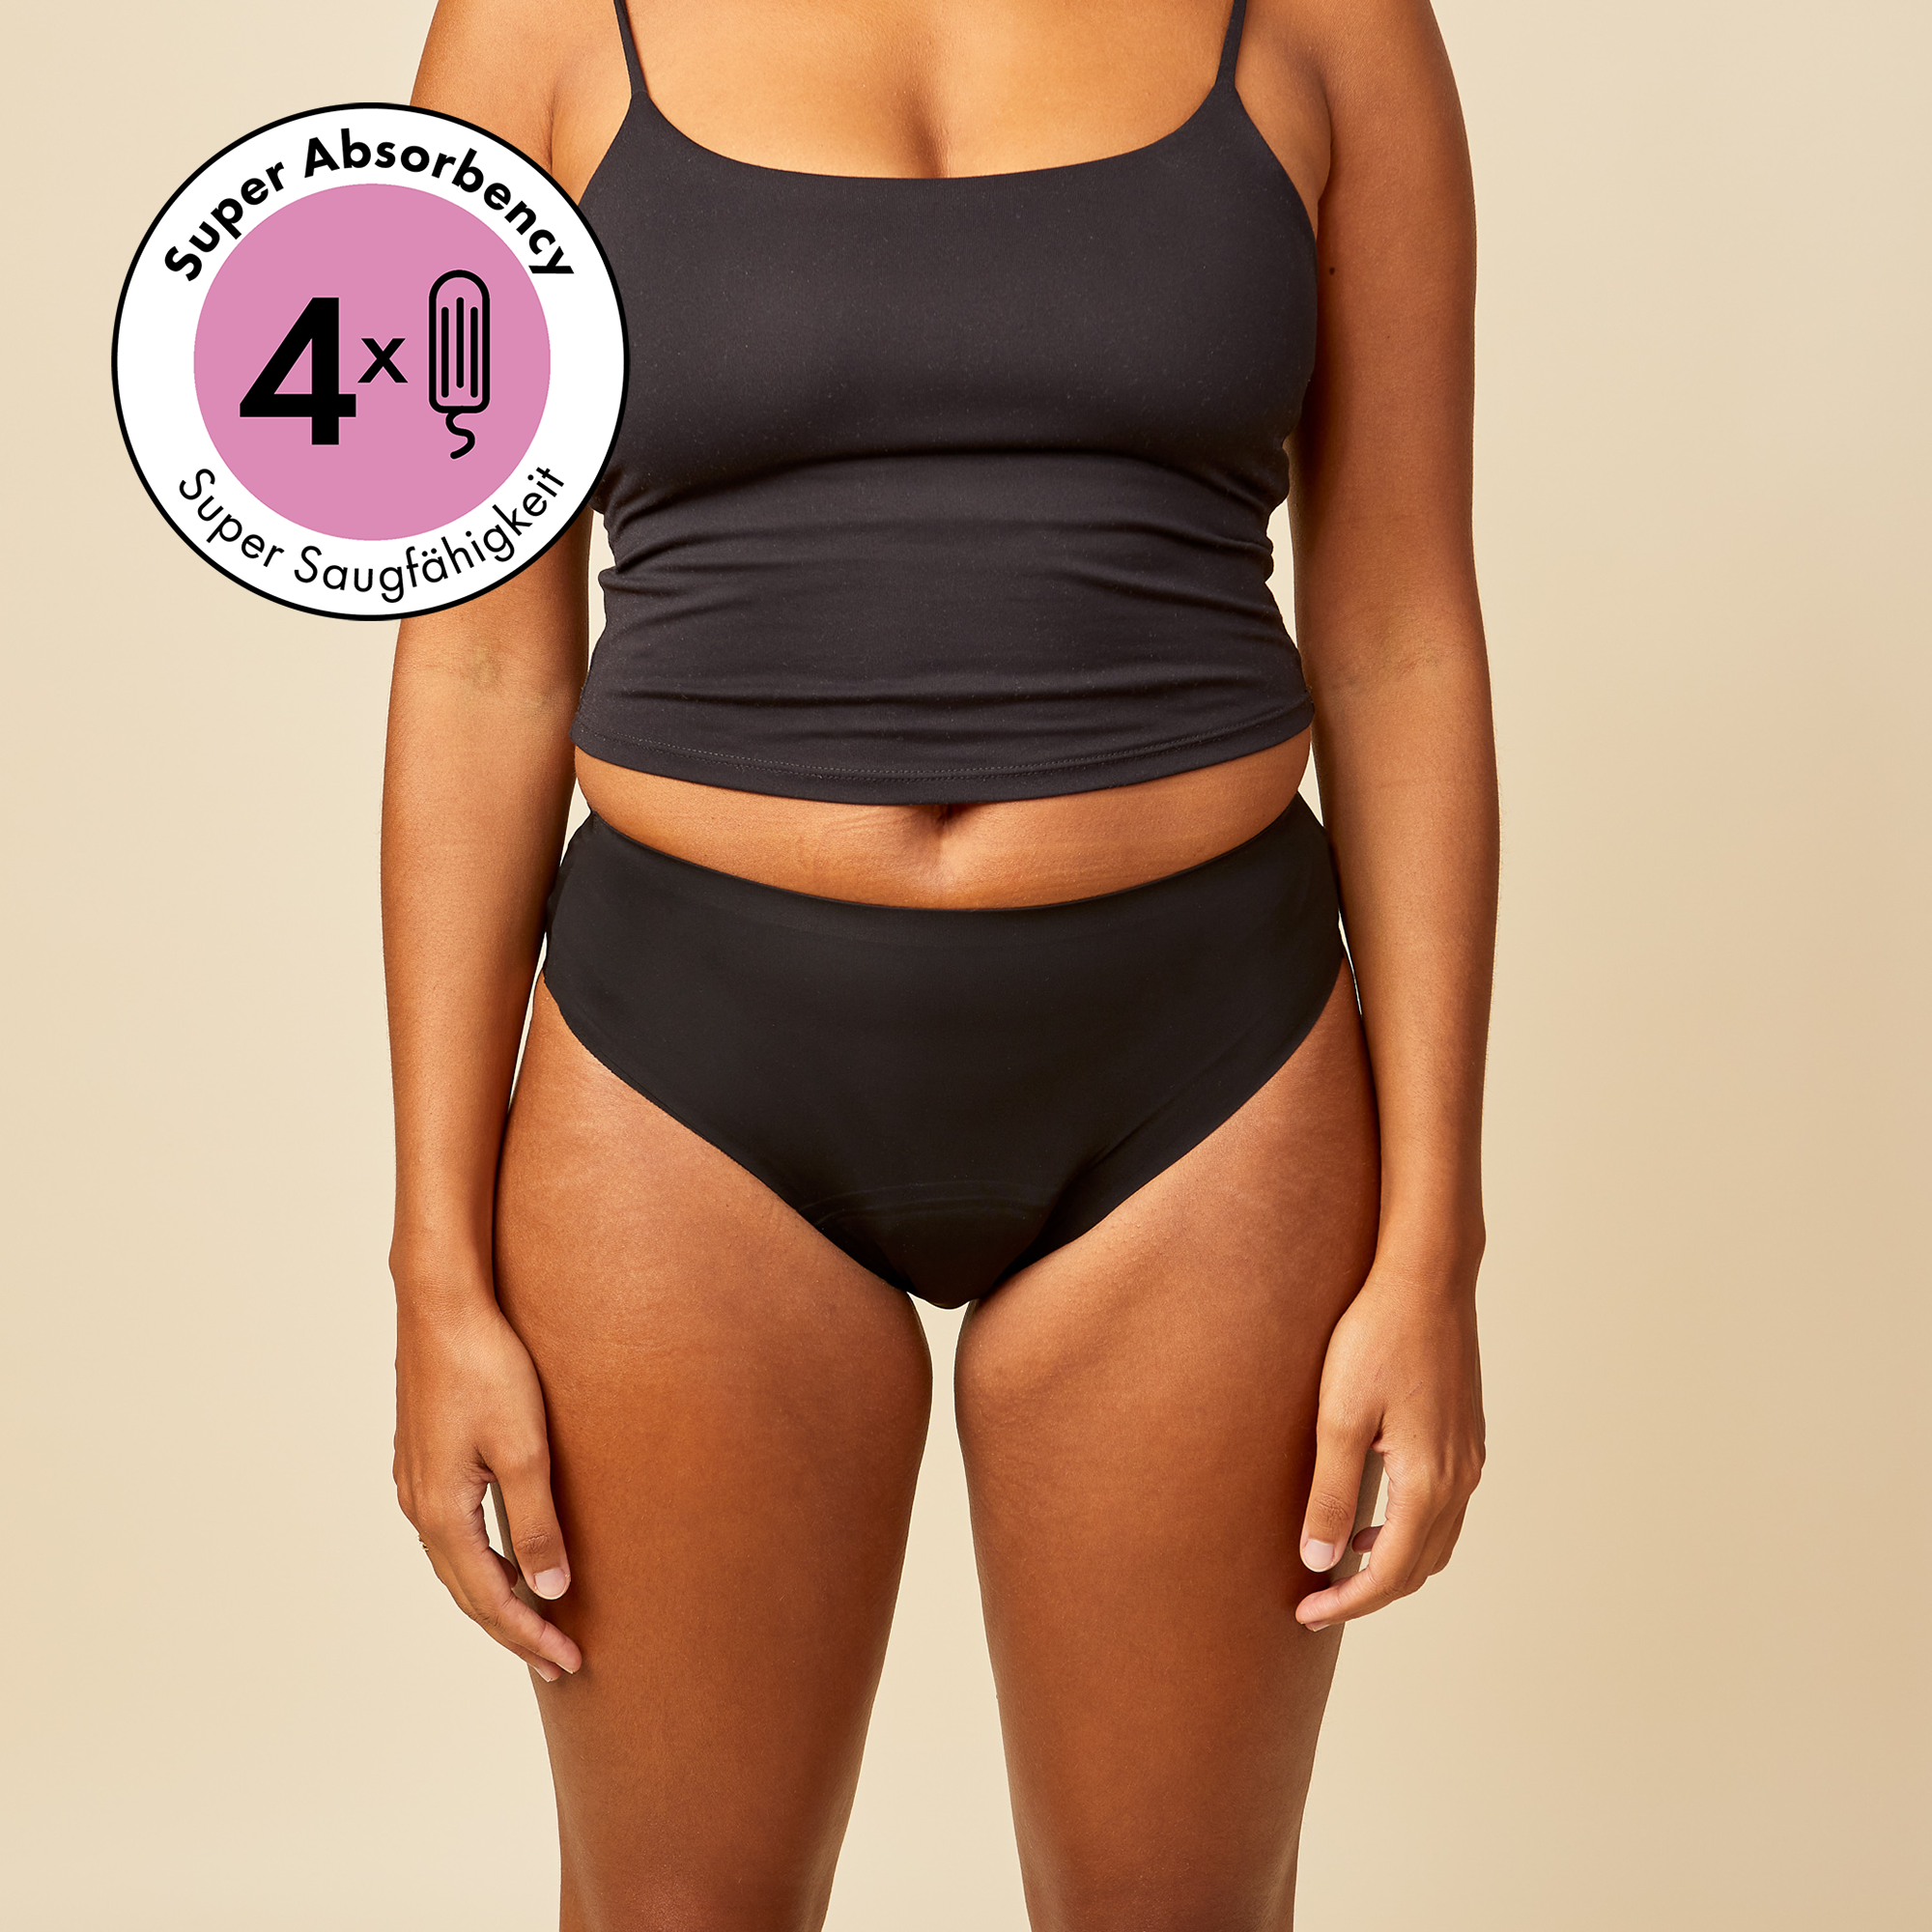 dais period underwear with cheeky cut in black shown by model from the front with super absorbency of 4 tampons.